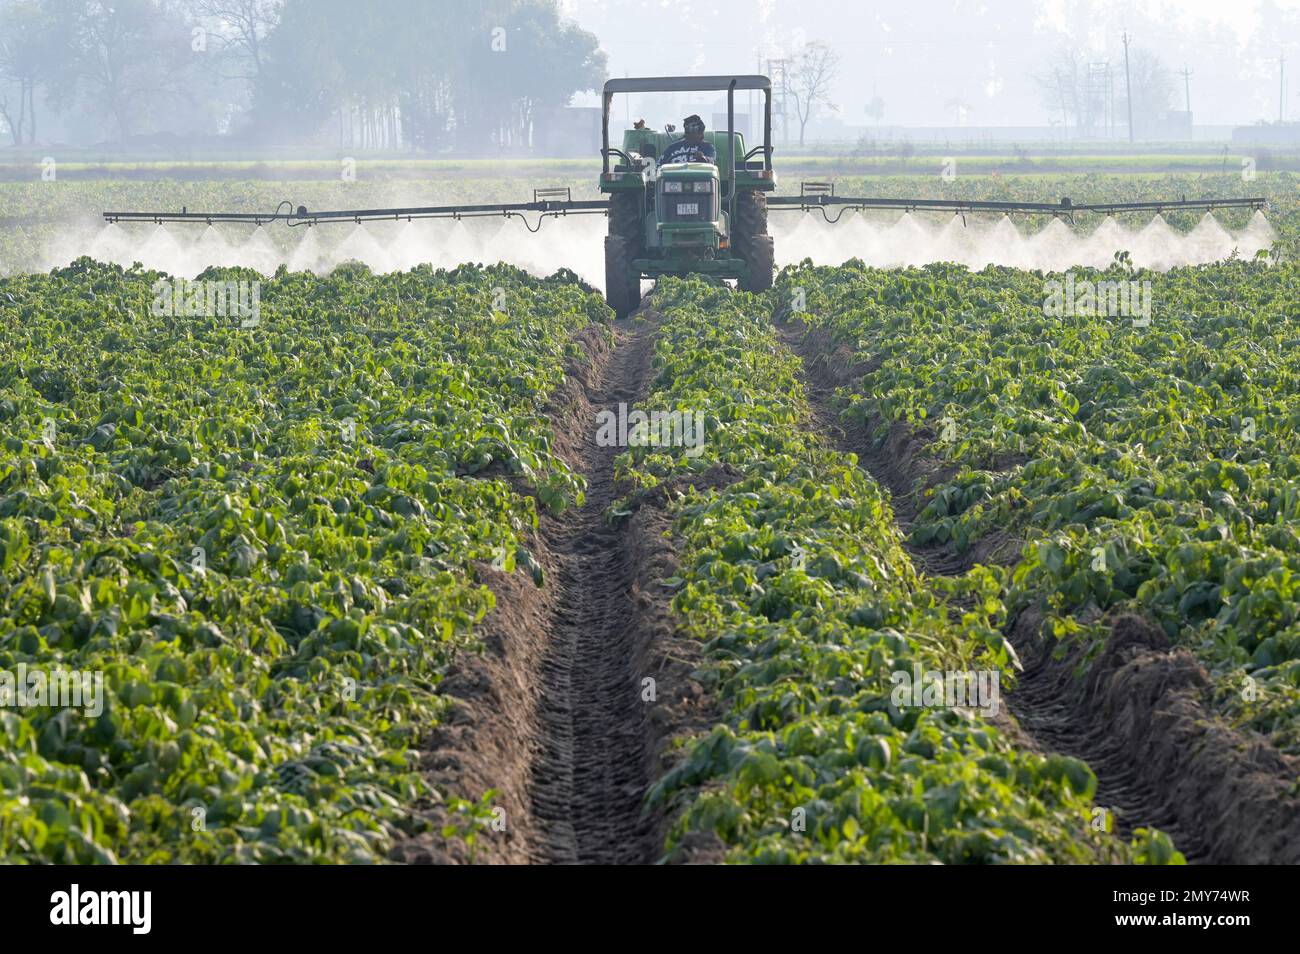 INDIA, Punjab, Ludhiana, spraying of pesticides in potato field with John Deere tractor and spraying machine, in Punjab, the granary of India, started the green revolution in the 1960´s to increase food production with irrigation systems, use of fertilizer, pesticide and high yielding hybrid seeds Stock Photo